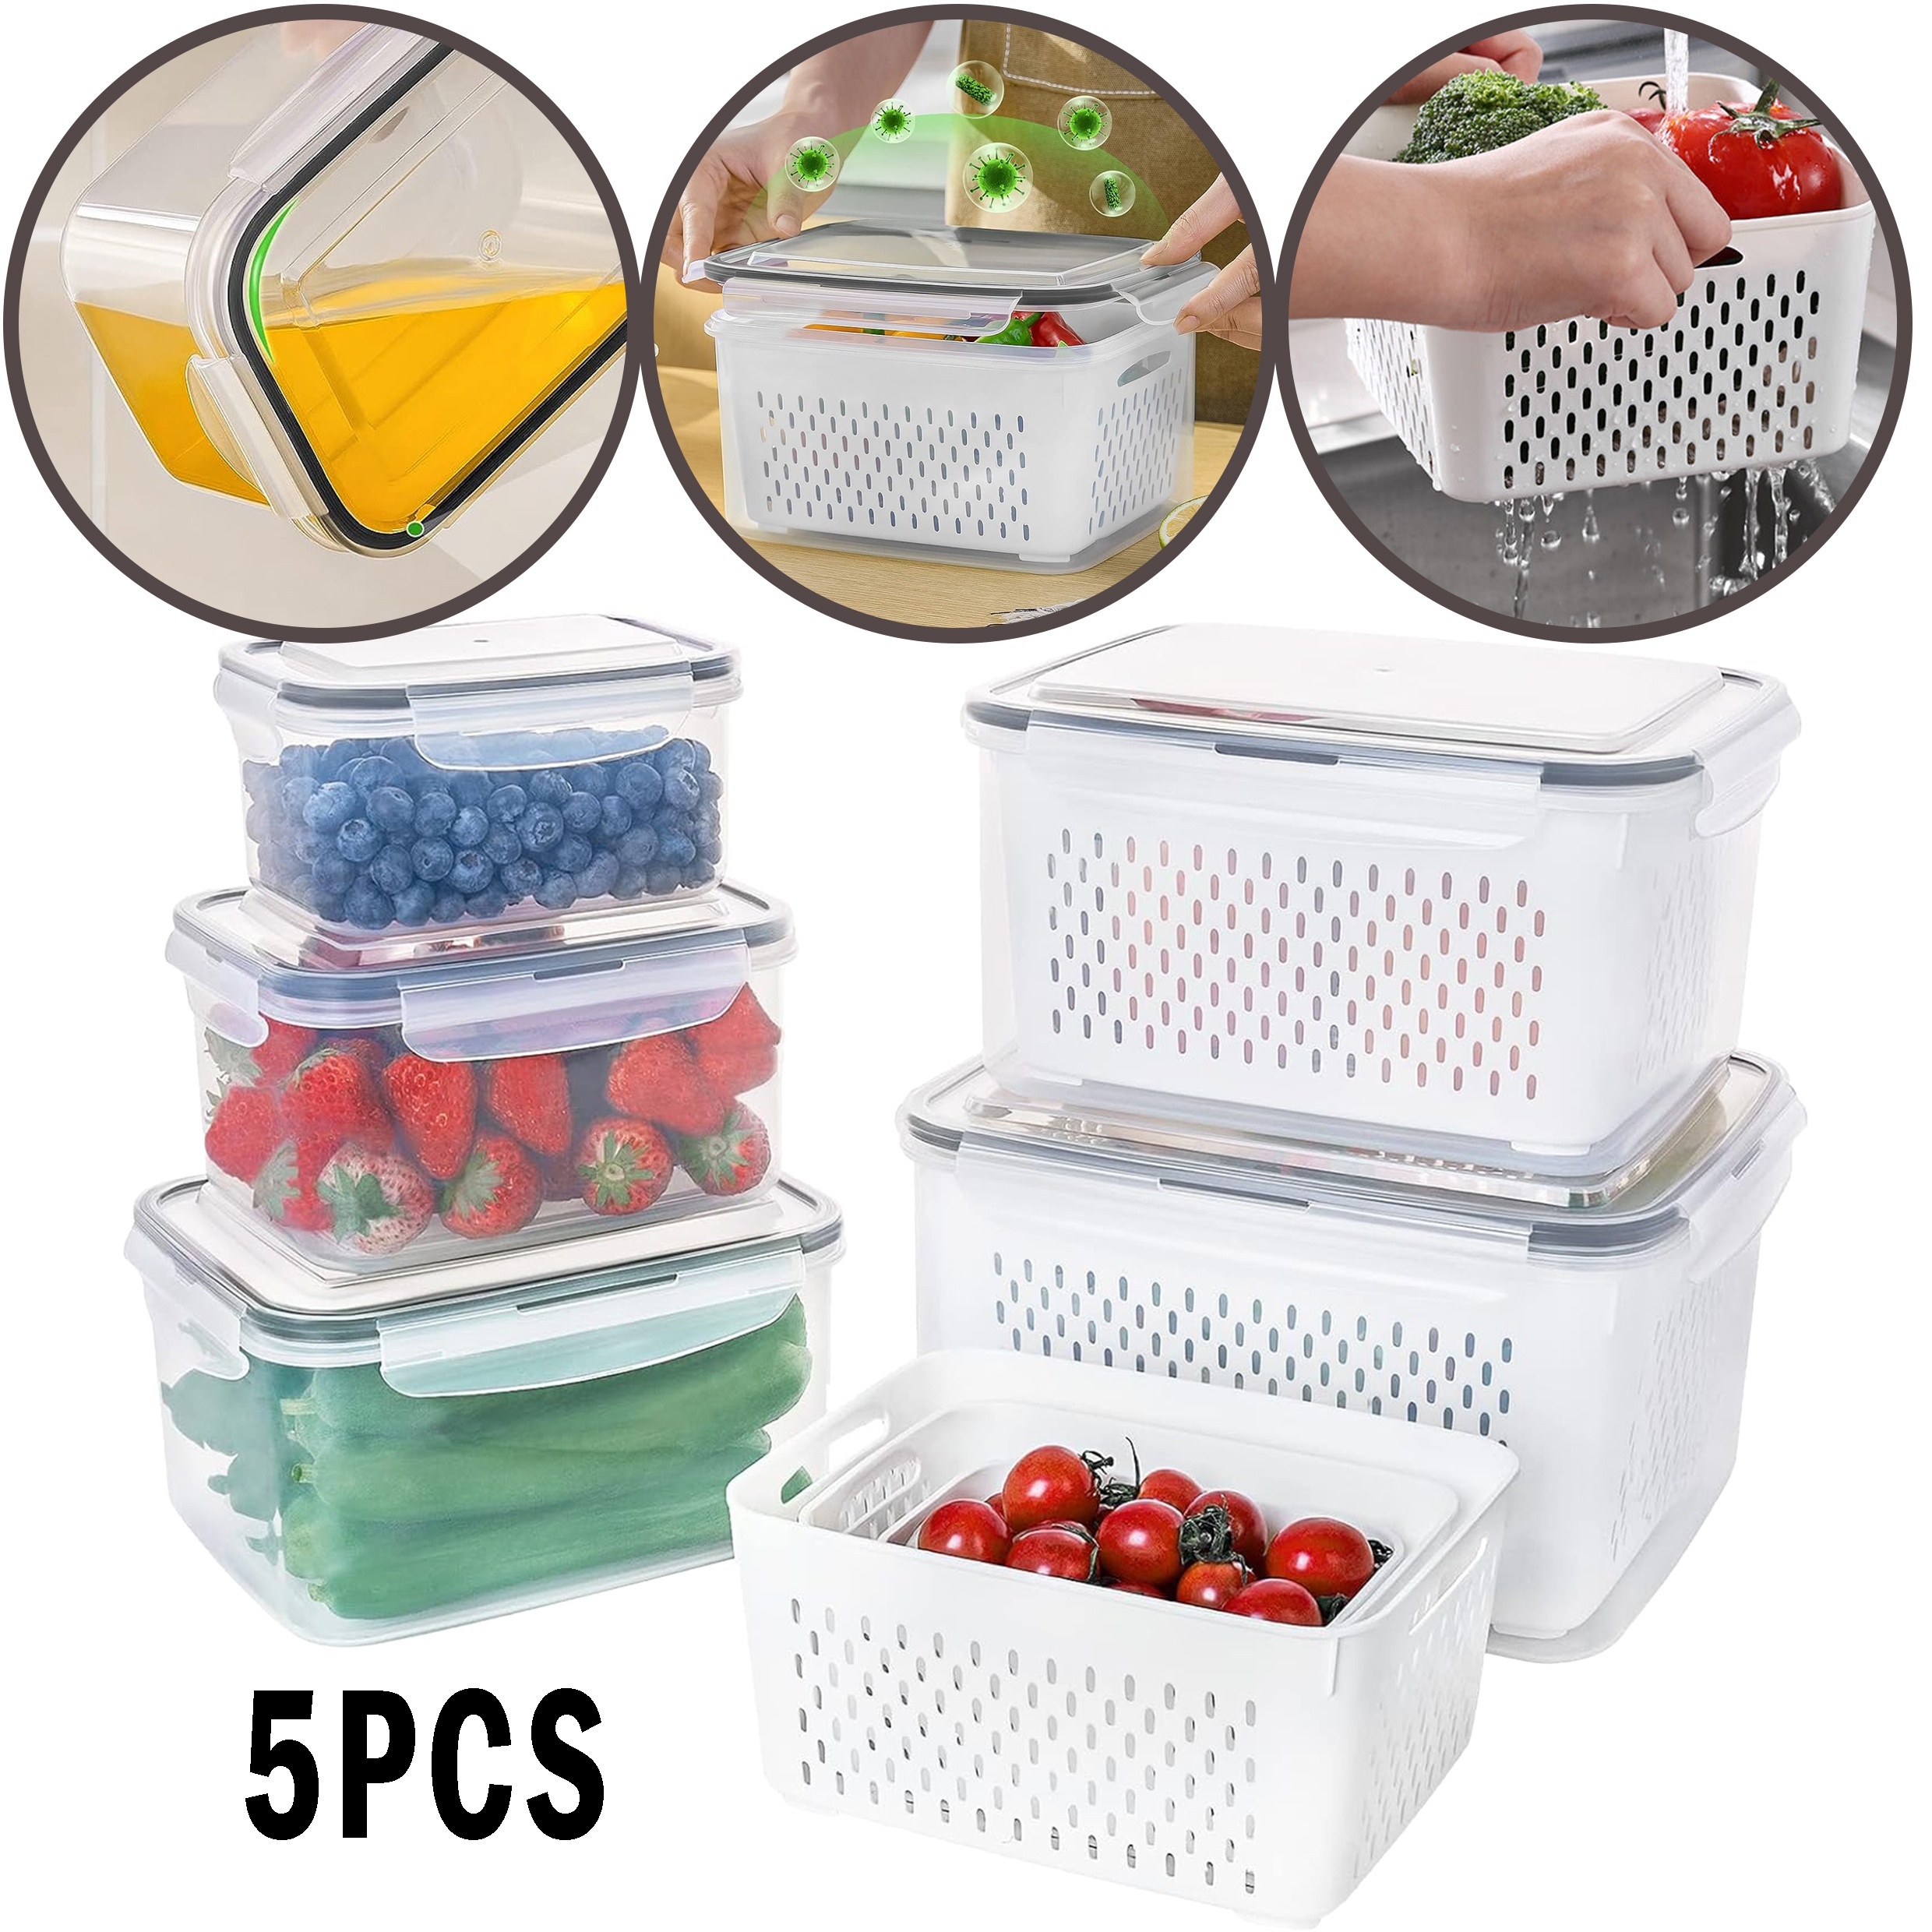 5 PCS Large Fruit Containers for Fridge - Leakproof Food Storage Containers  with